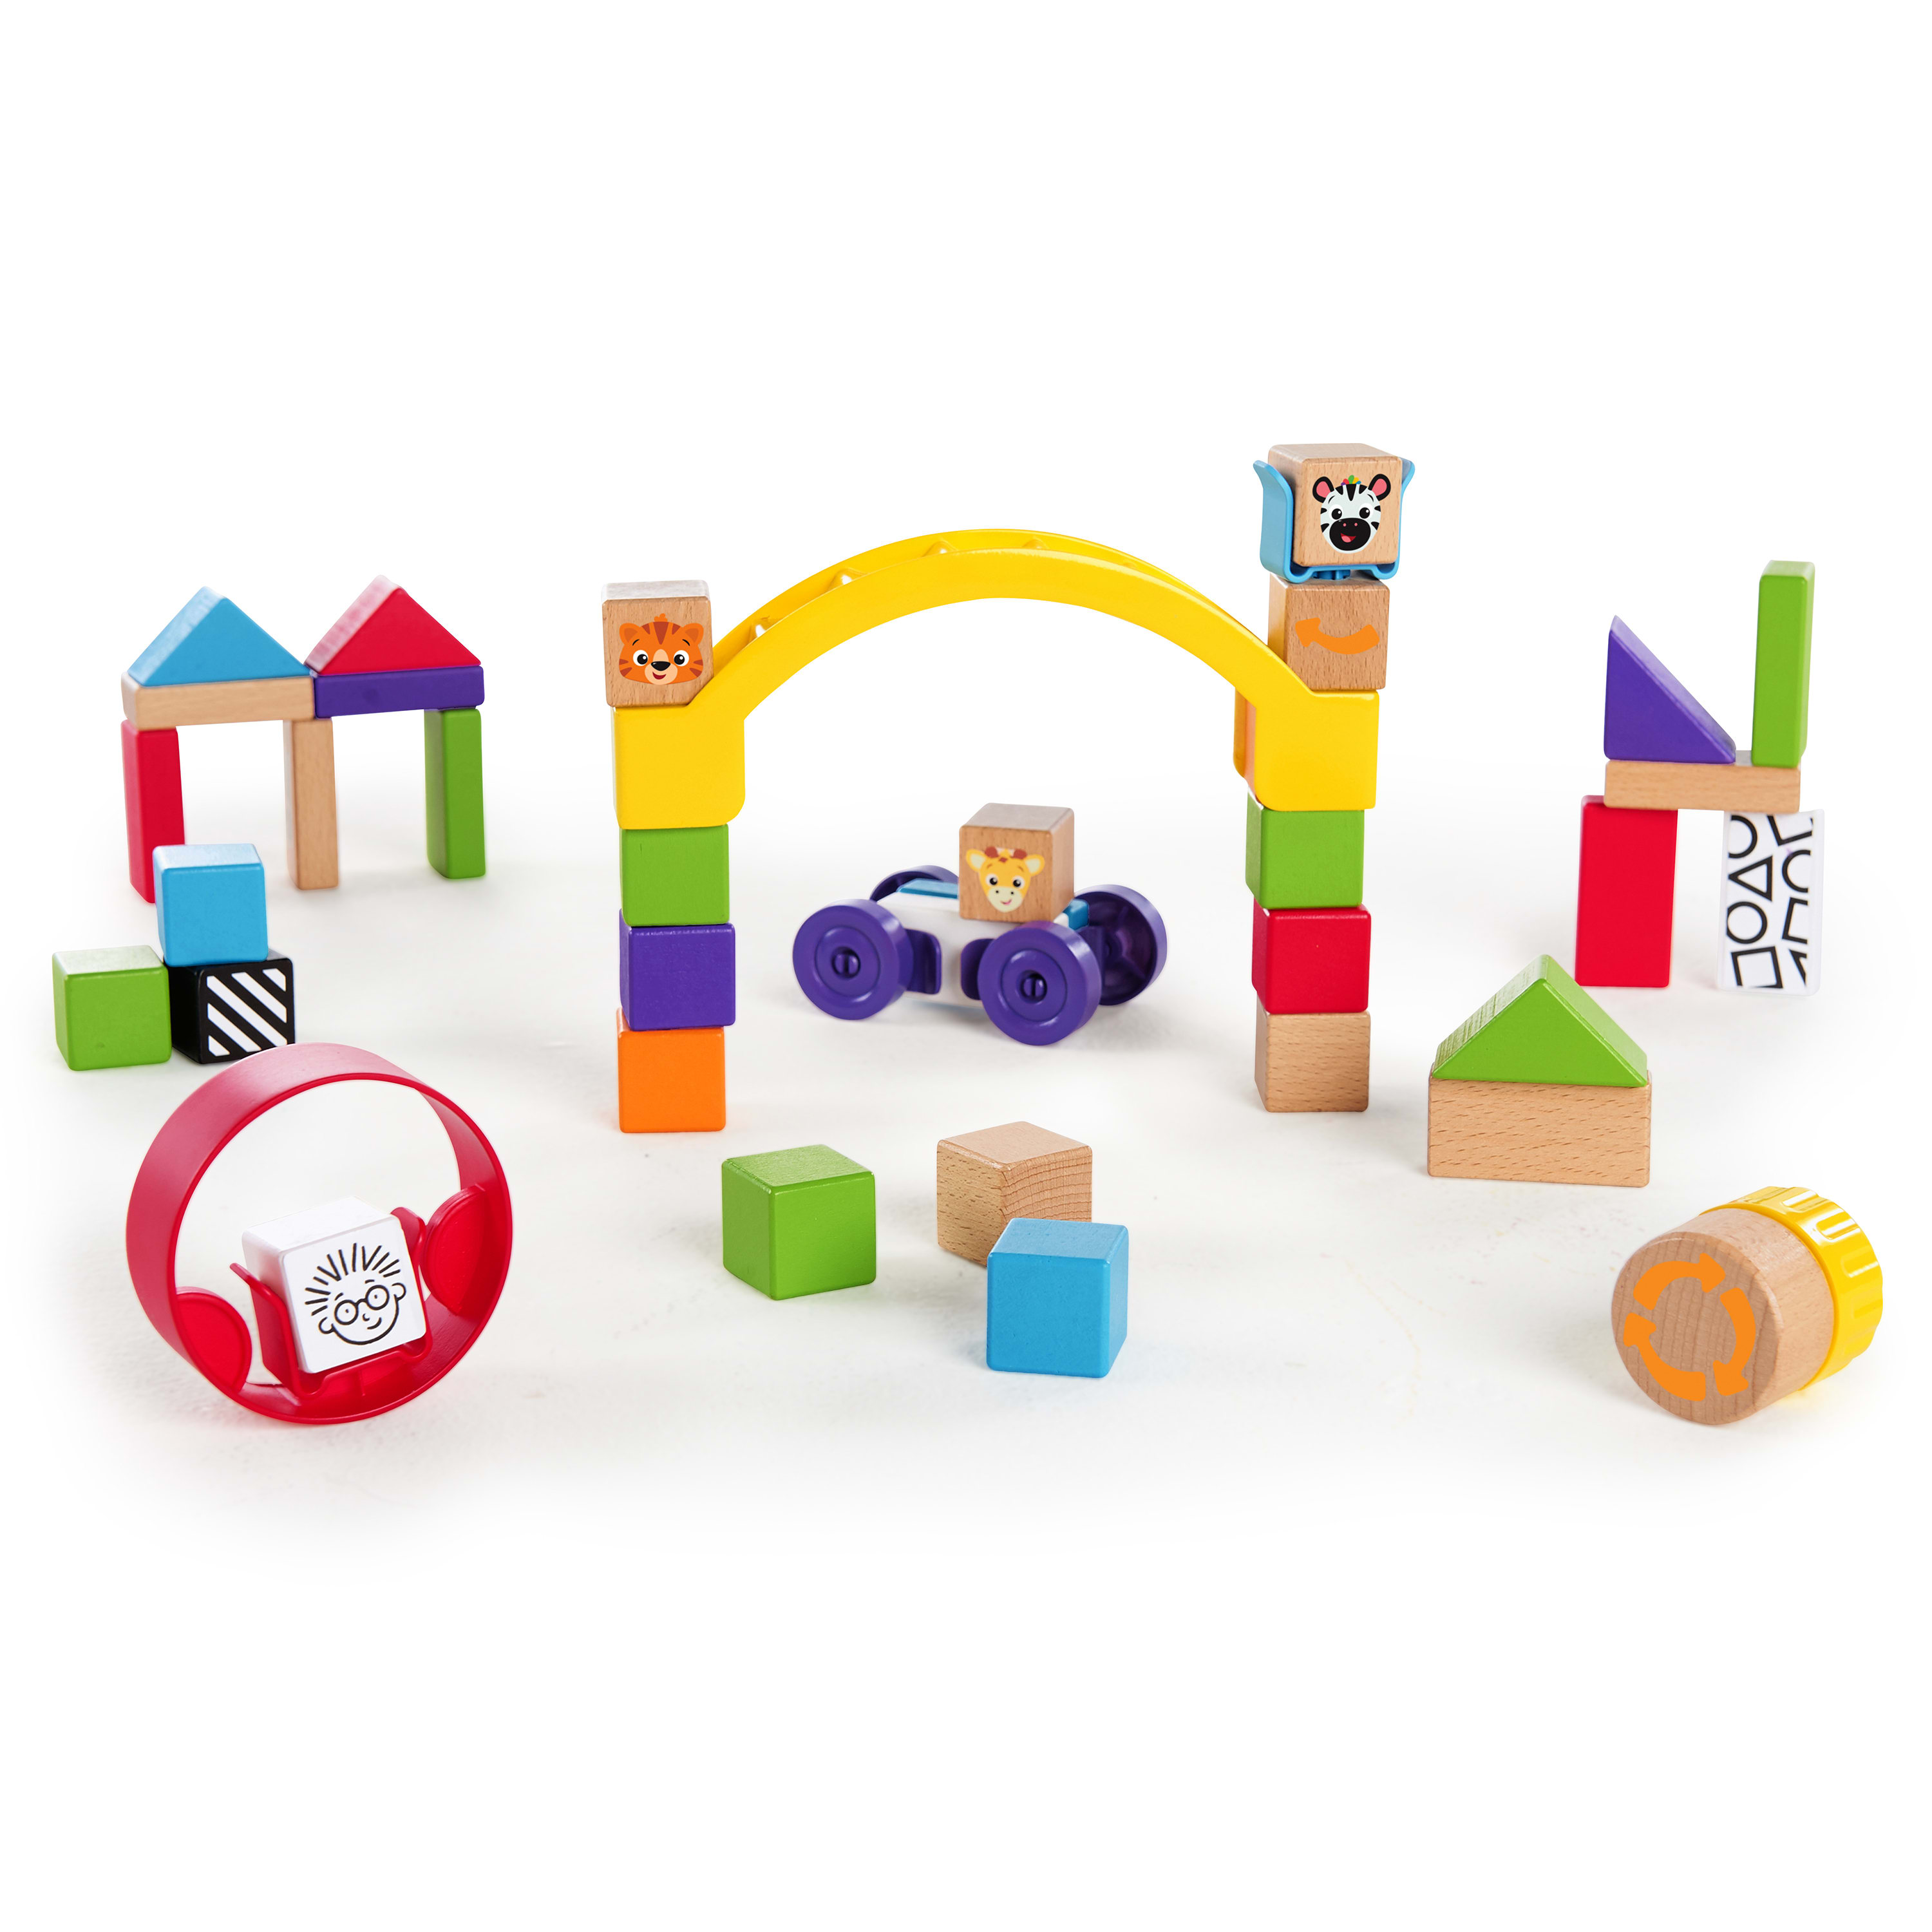 Baby Einstein Curious Creator Kit Wooden Blocks Discovery 40 Piece Toy Set, Ages 12 months + - image 1 of 17